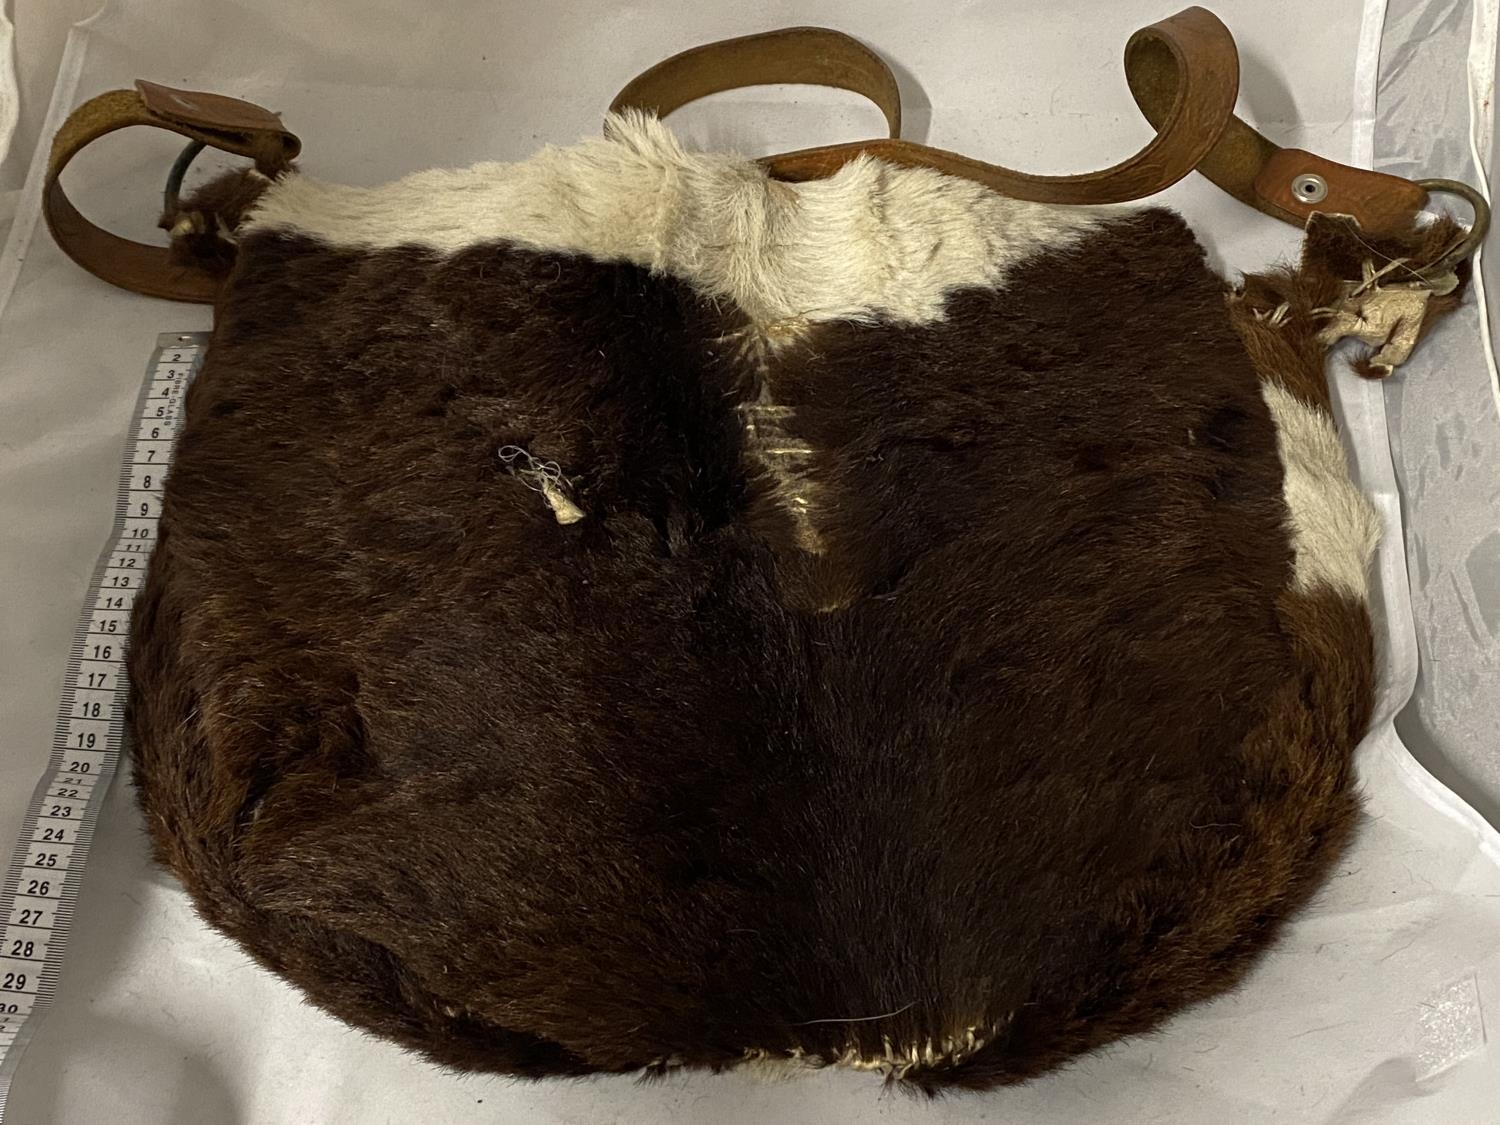 A vintage native Indian style hand sewn hunting shoulder bag made from animal hide - Image 2 of 2